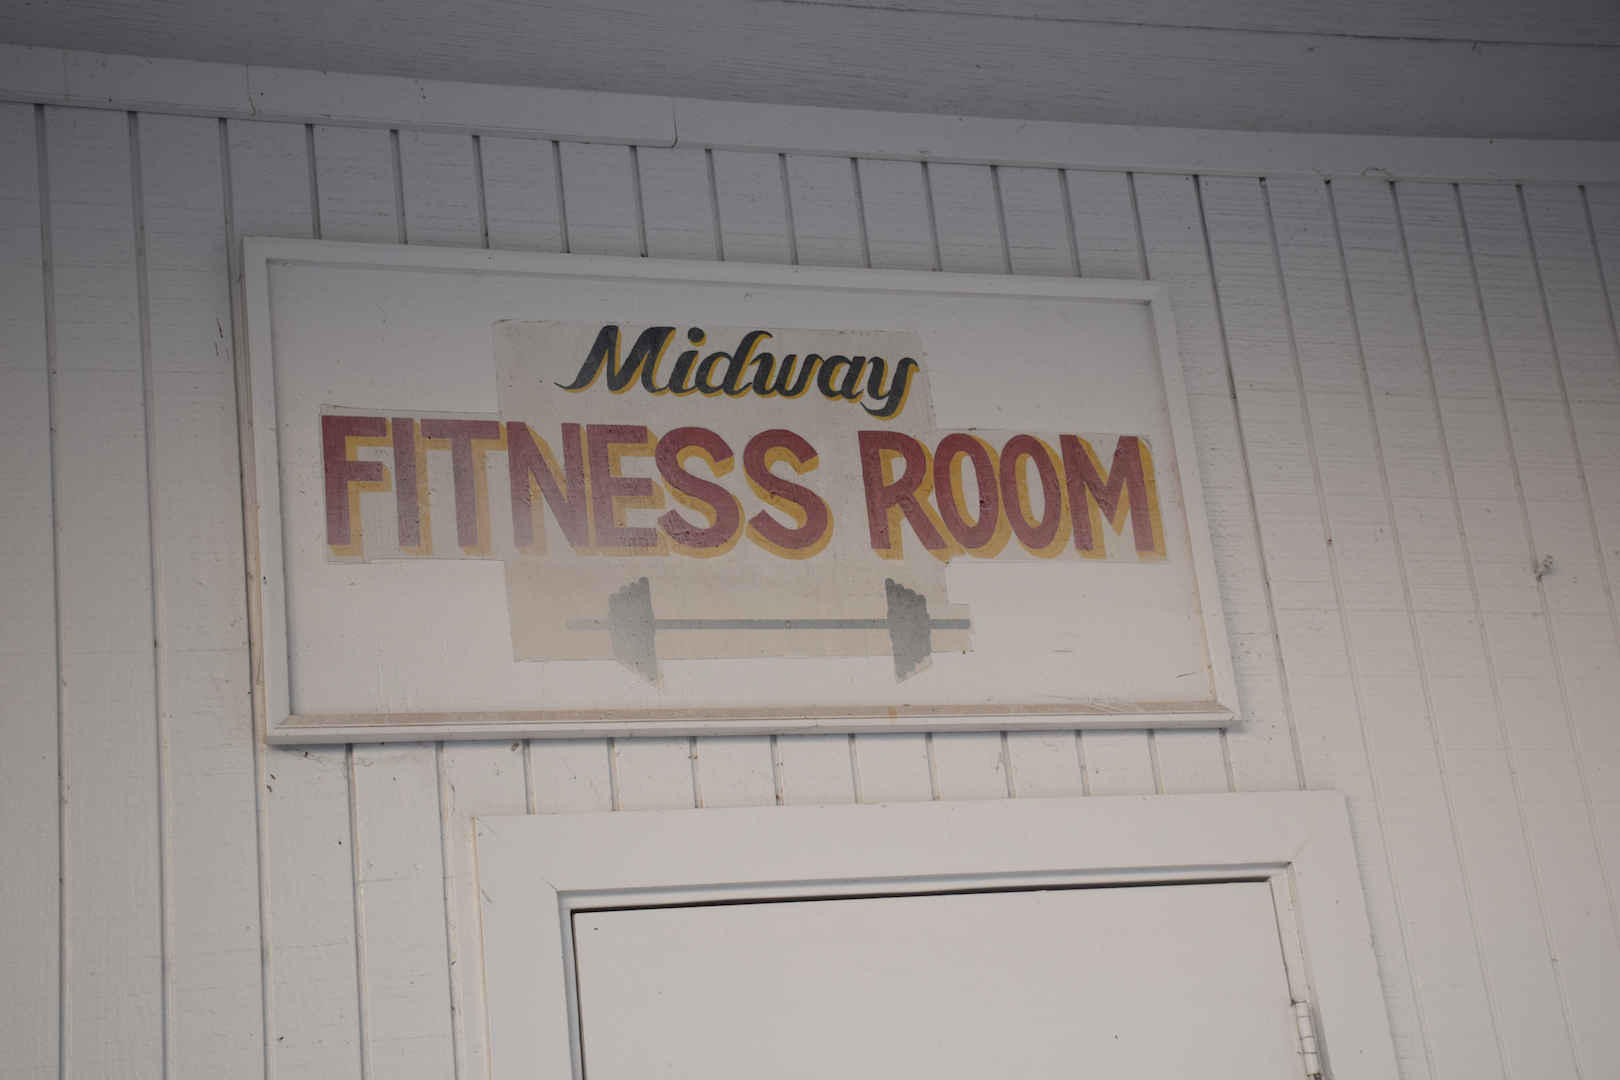 Midway, Atoll, Gym, Fitness, Room, 24 hour fitness, church of iron, temple of gains,